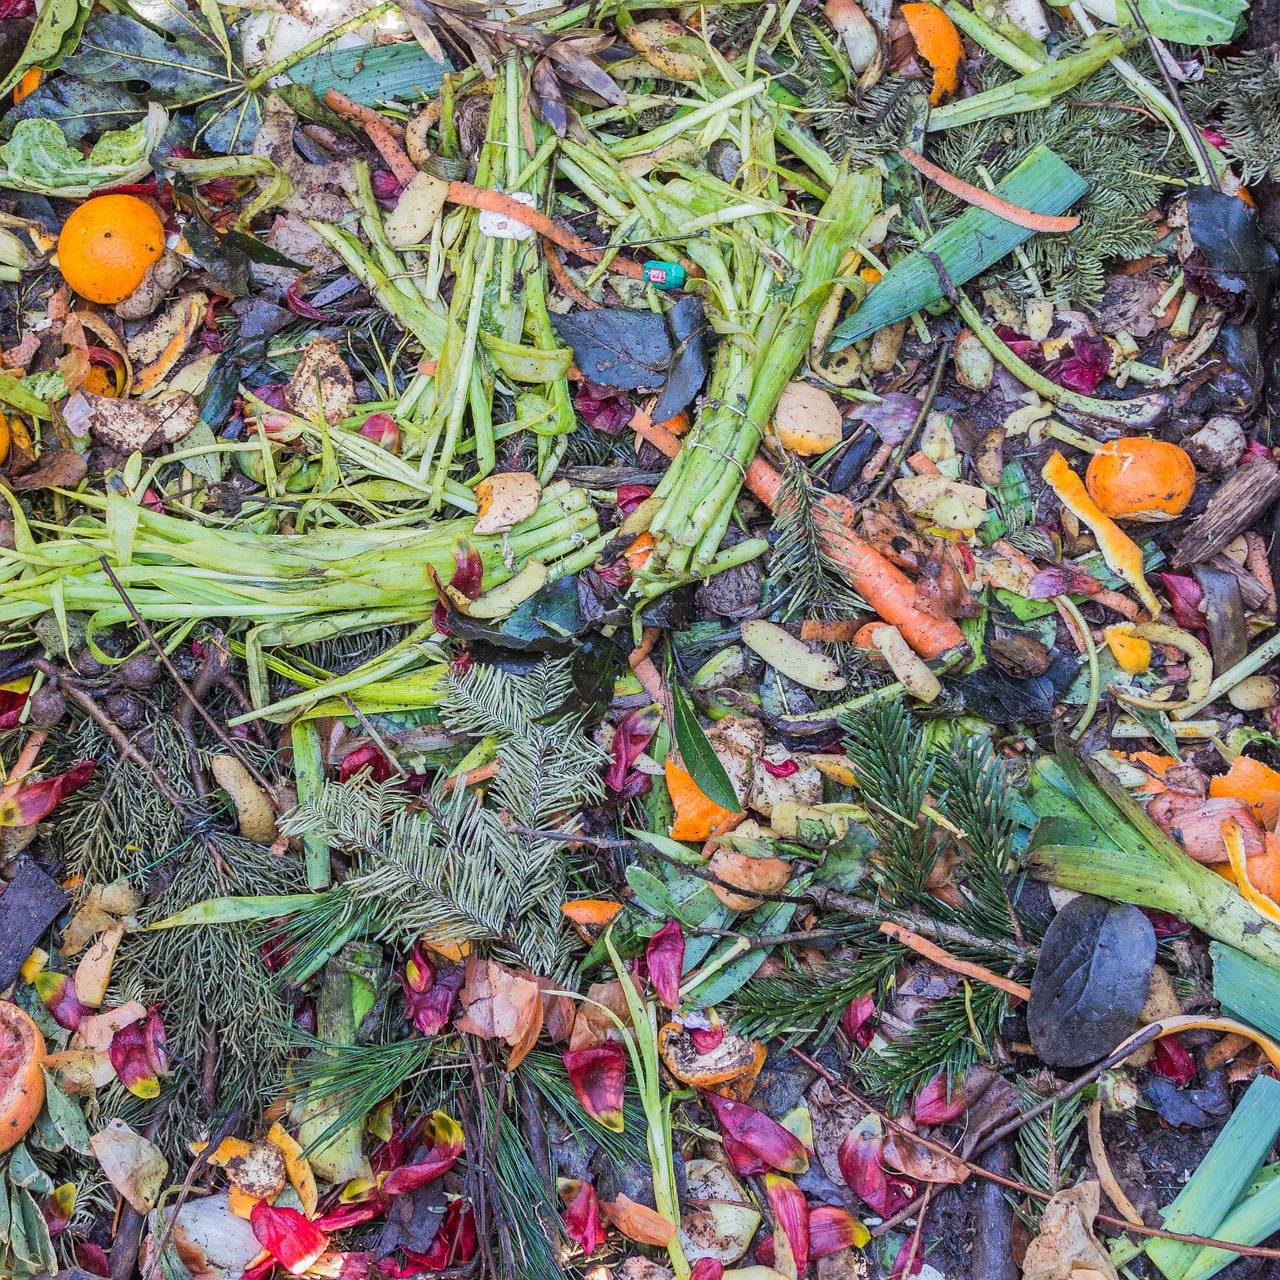 4 crazy things you didn’t know about green waste